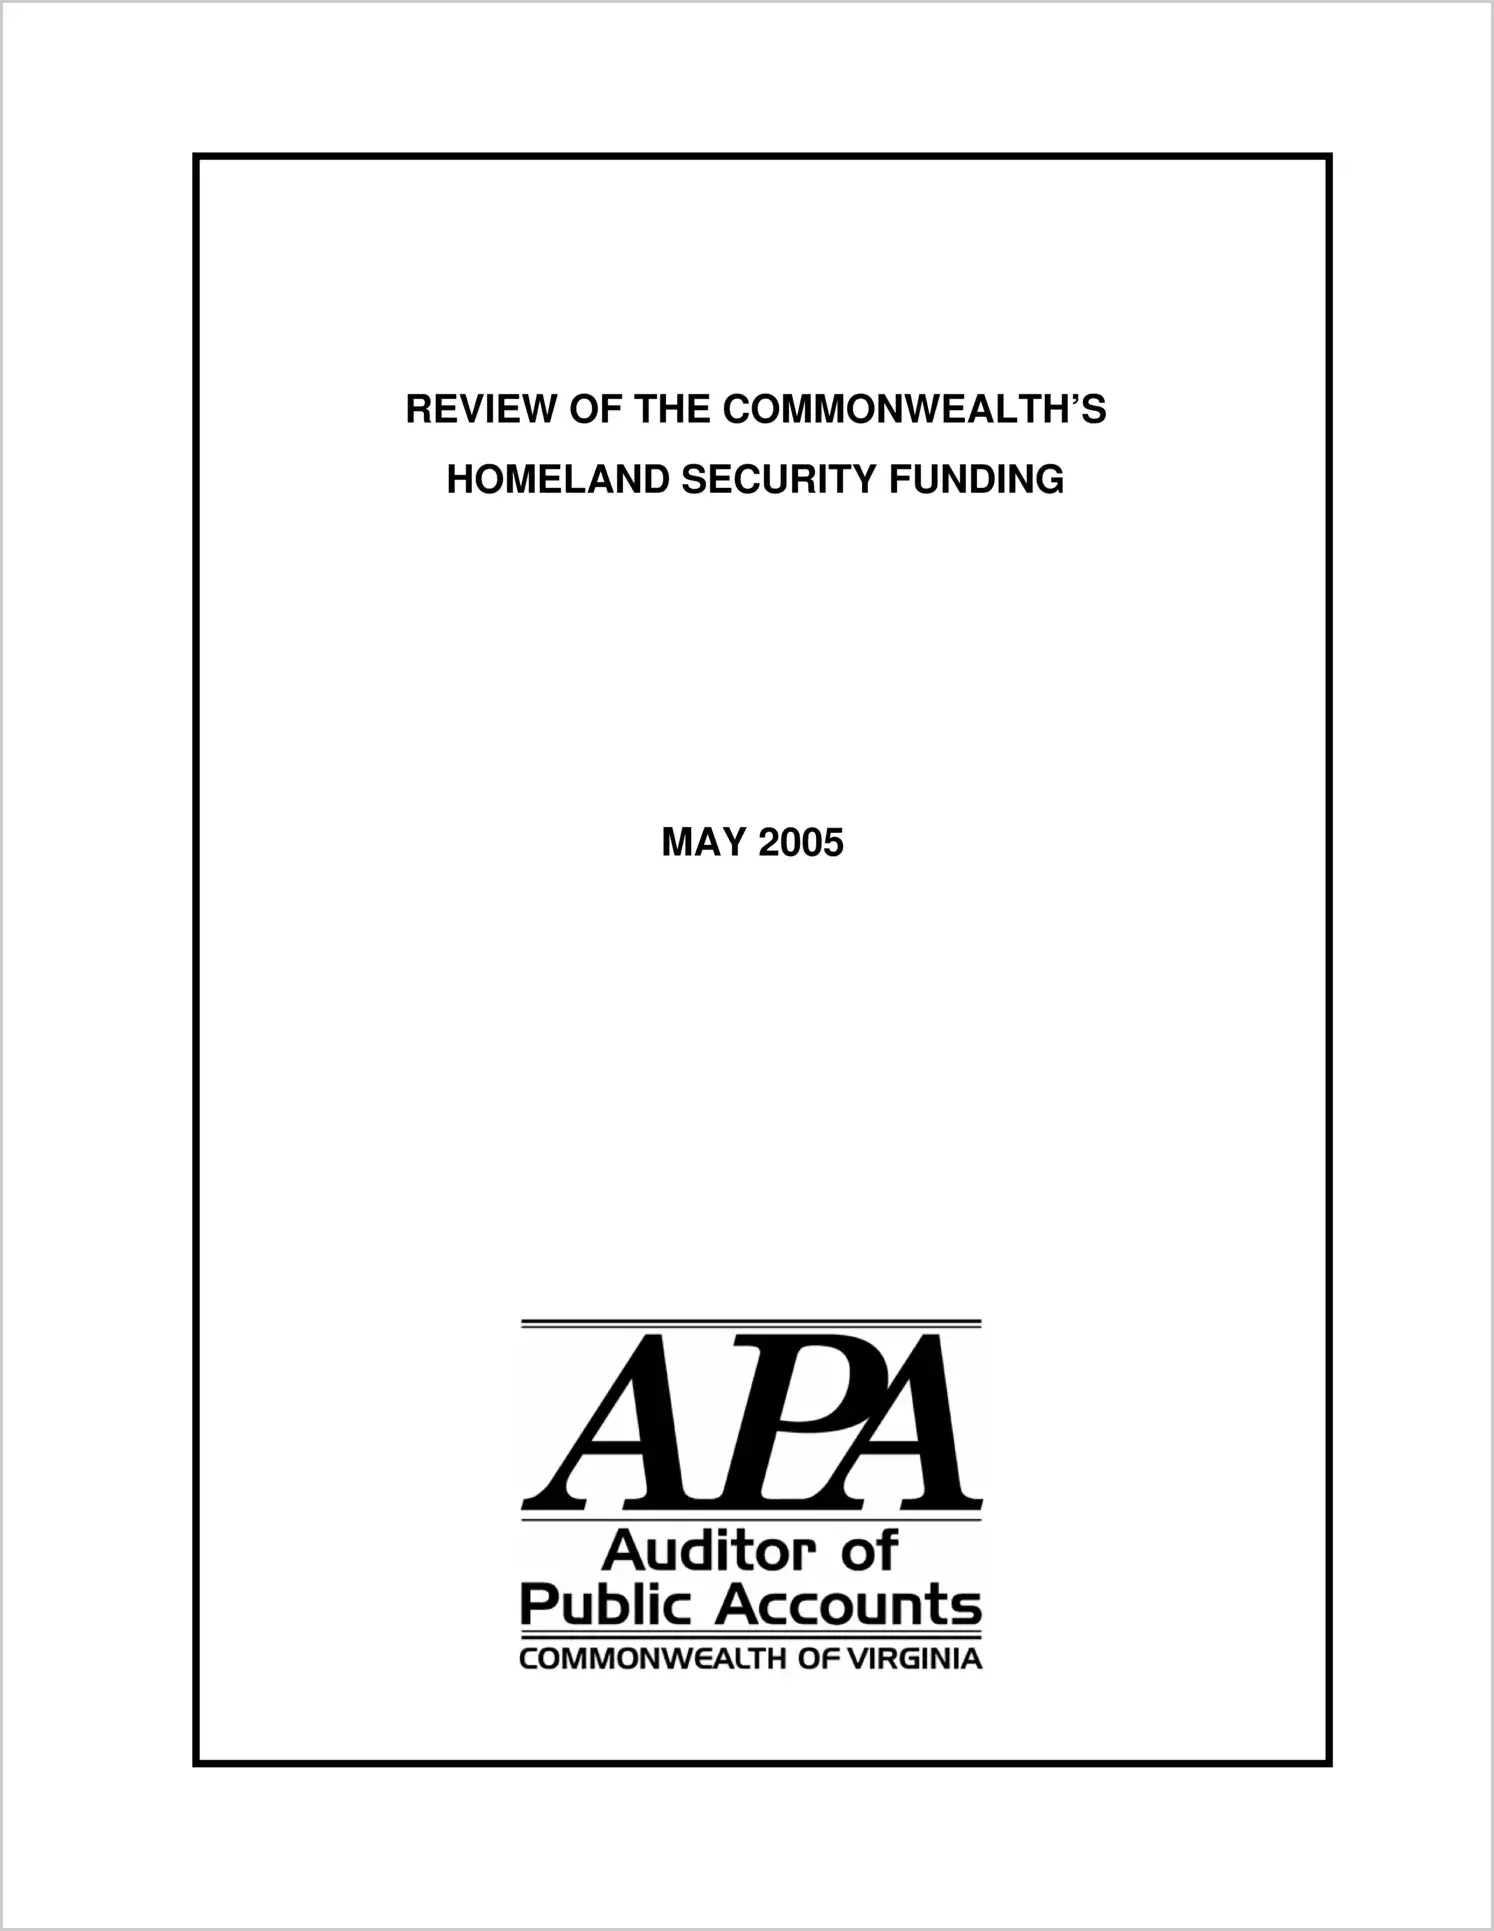 Special ReportReview of the Commonwealths Homeland Security Funding(Report Date: 5/2005)